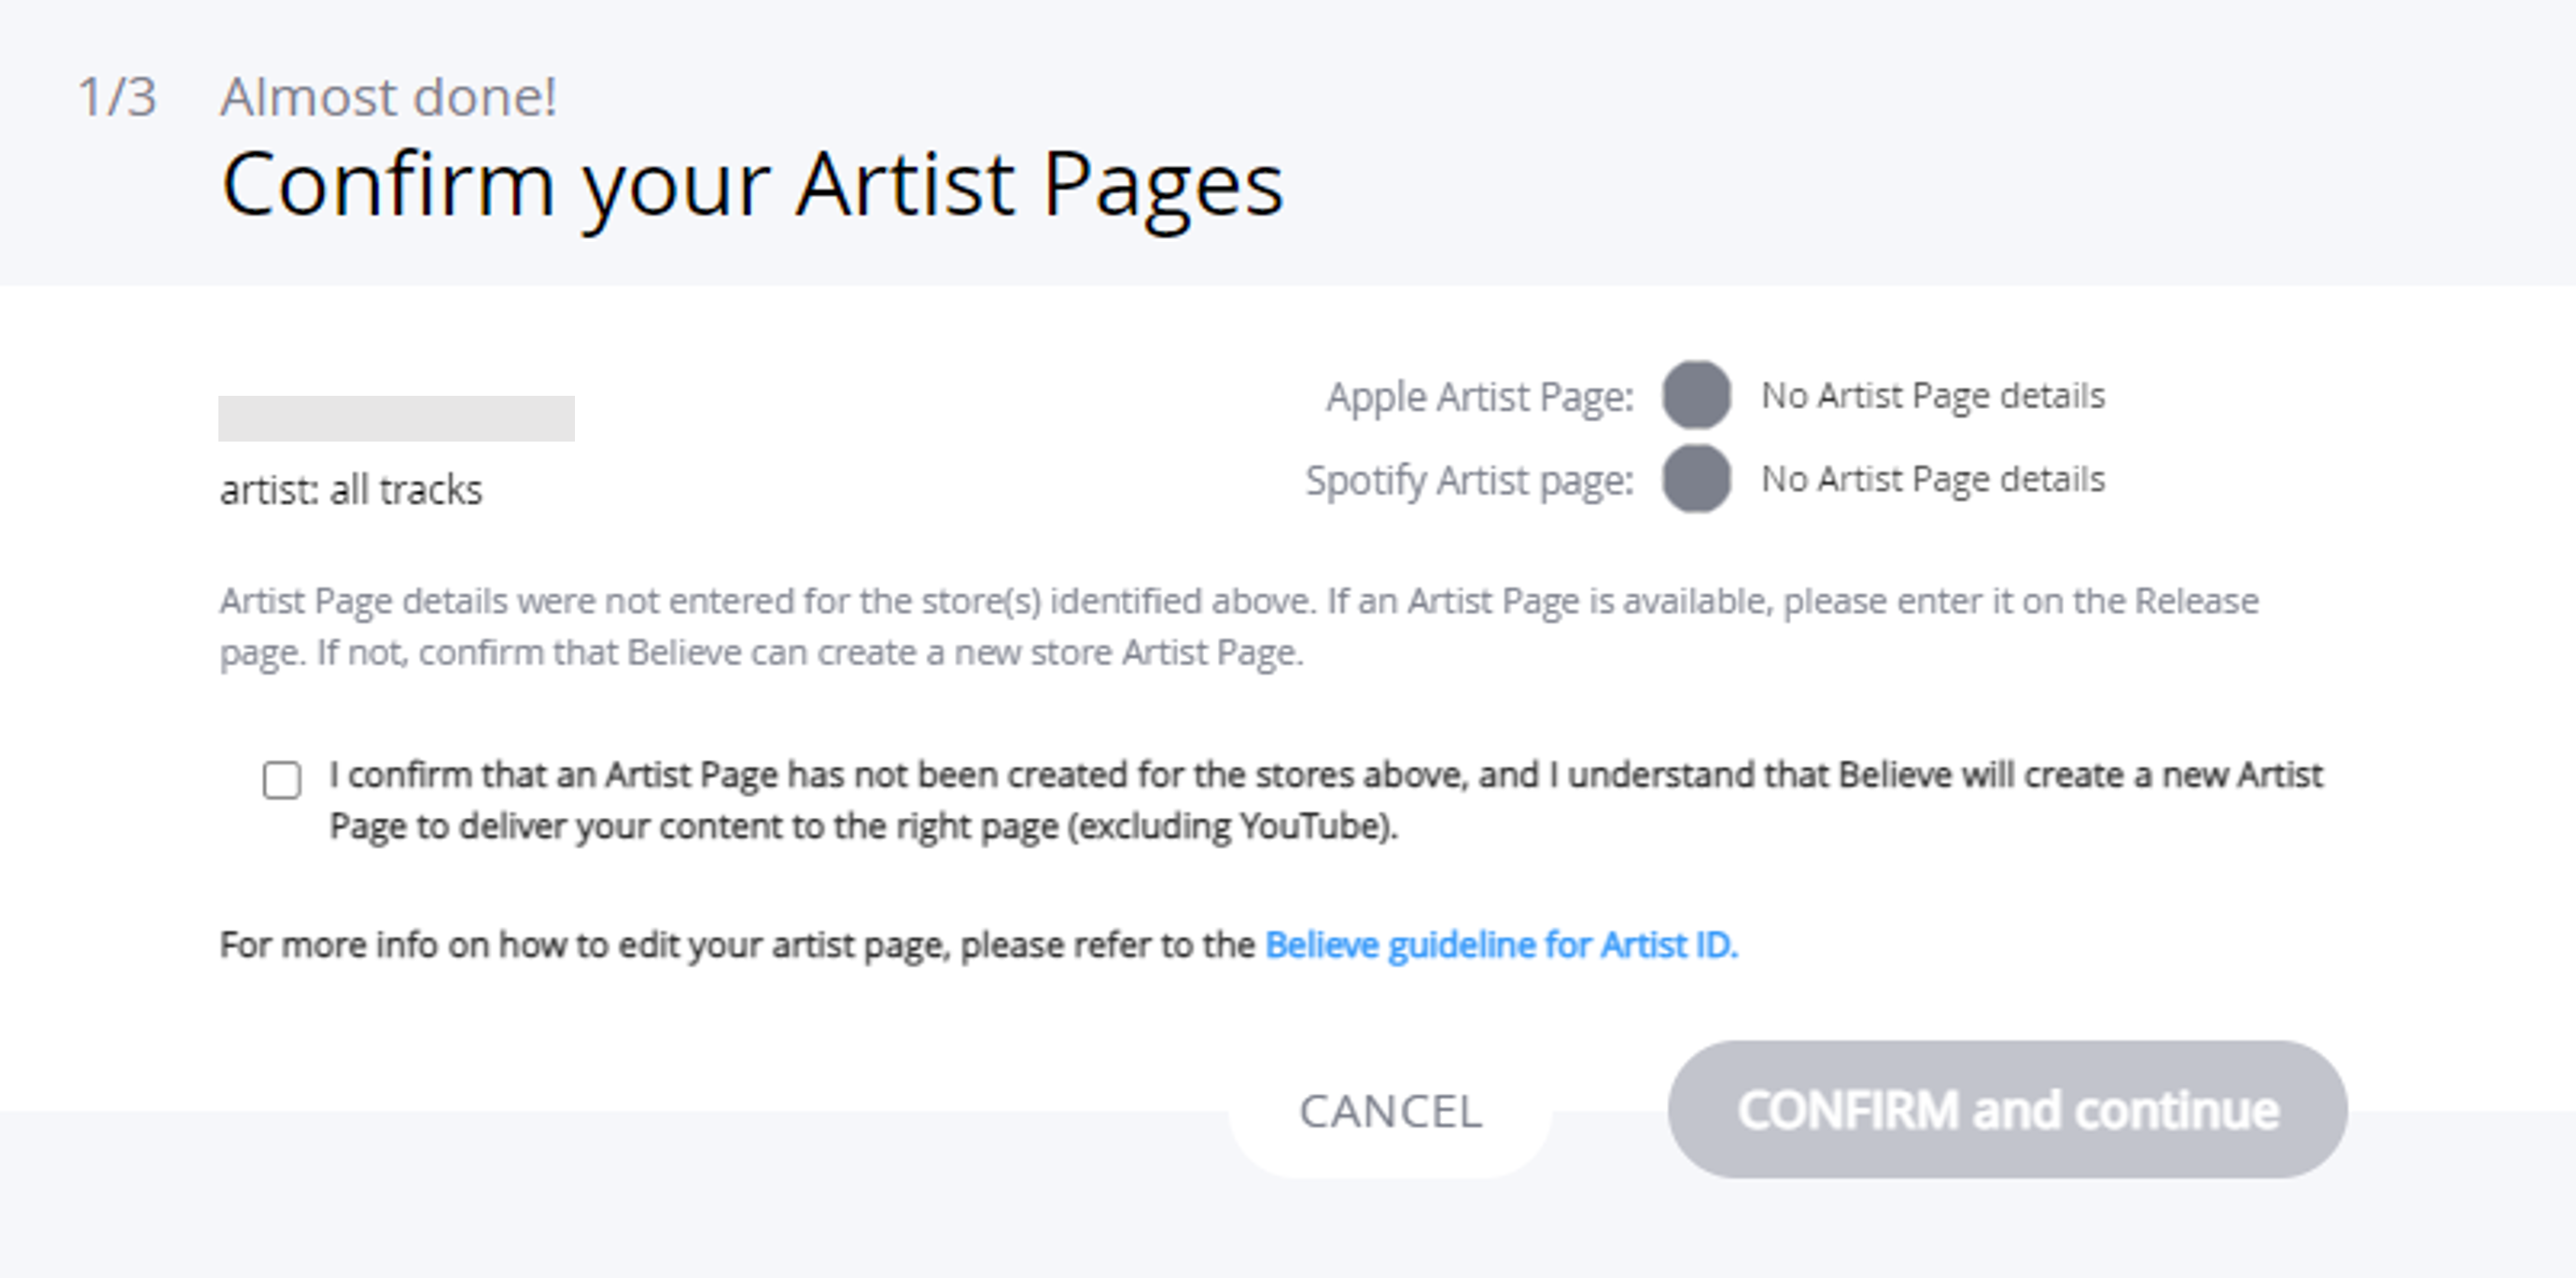 Confirm_your_Artist_Pages_-_empty.png